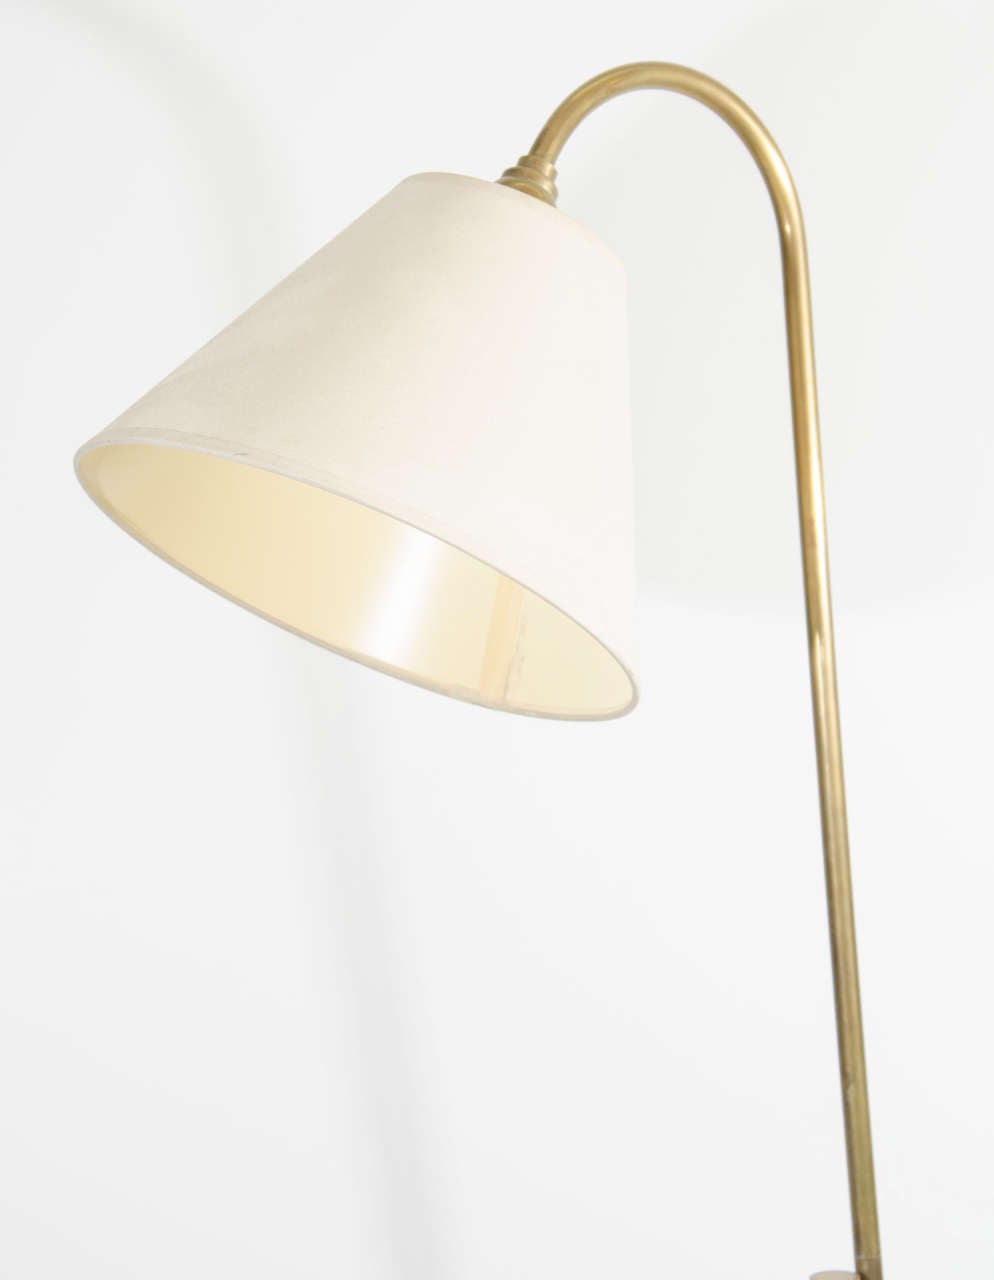 20th Century A Midcentury Brass Floor Lamp with Adjustable Pole